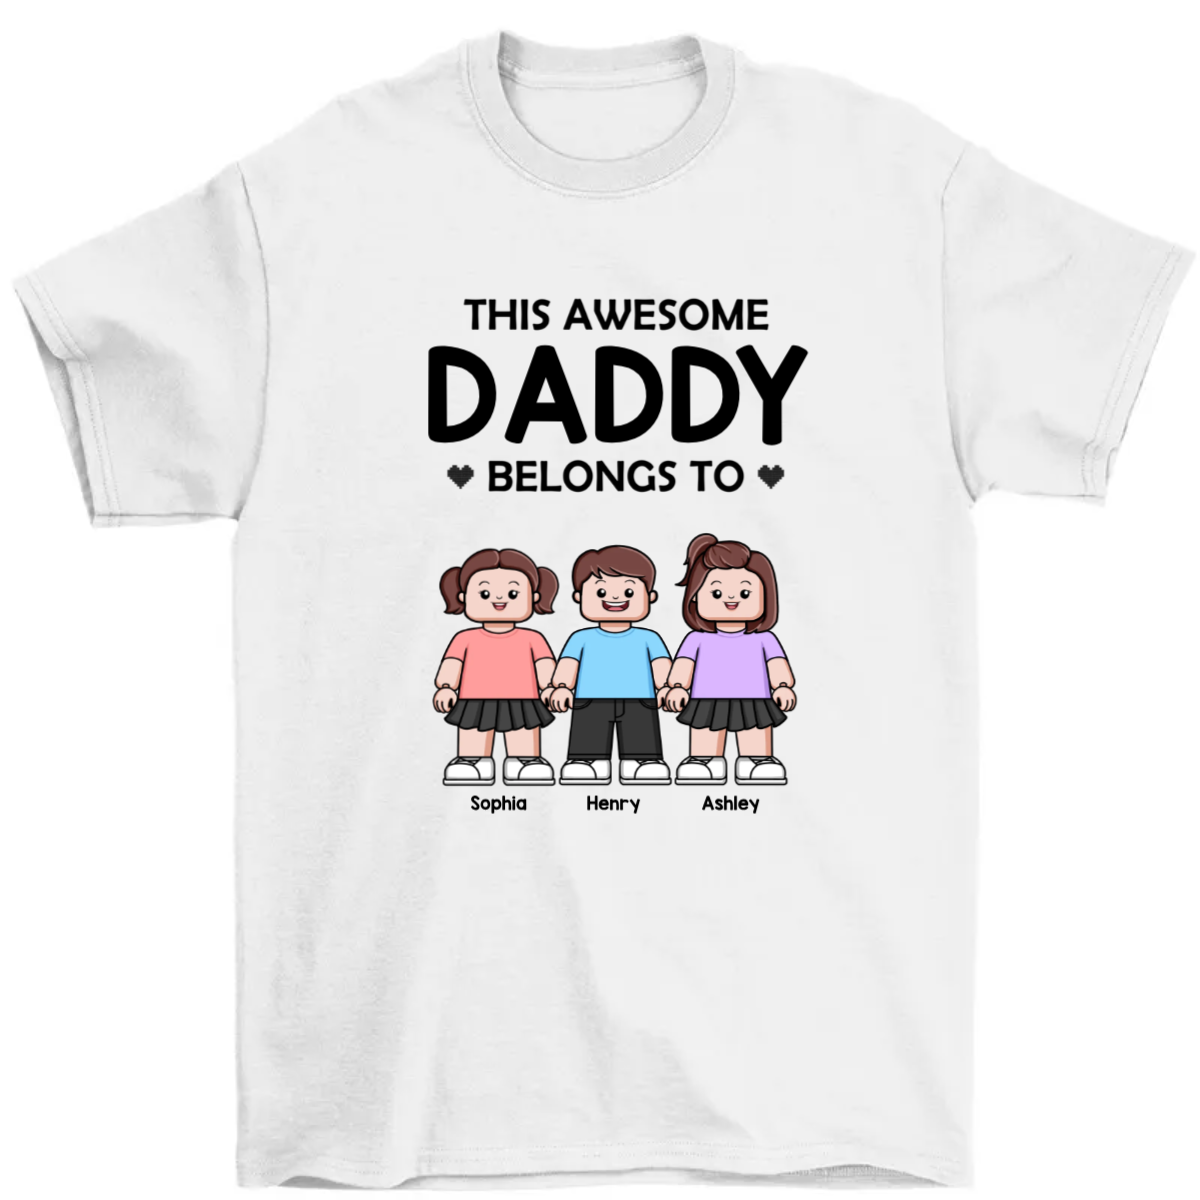 This Awesome Daddy Belongs To Kids Block Characters Personalized Shirt